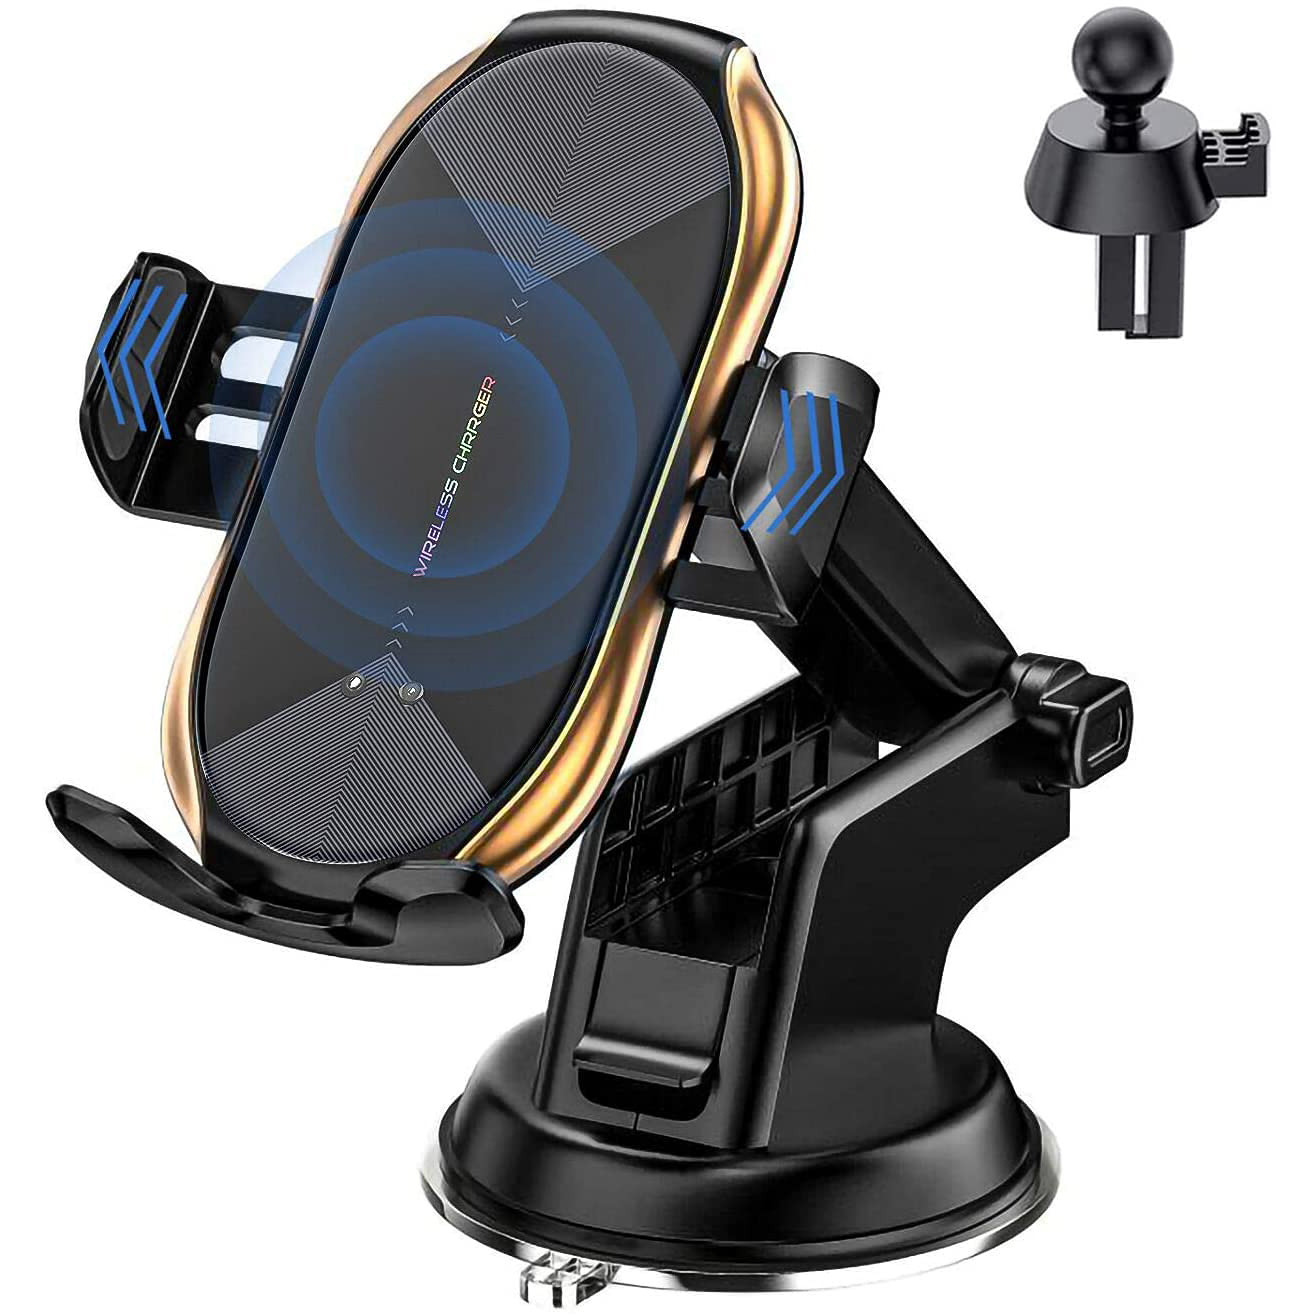 Wireless Car Charger Mount, MECOLA 10W/7.5W Qi Fast Charging Auto-Clamping Car Mount Air Vent Windshield Dashboard Car Phone Holder